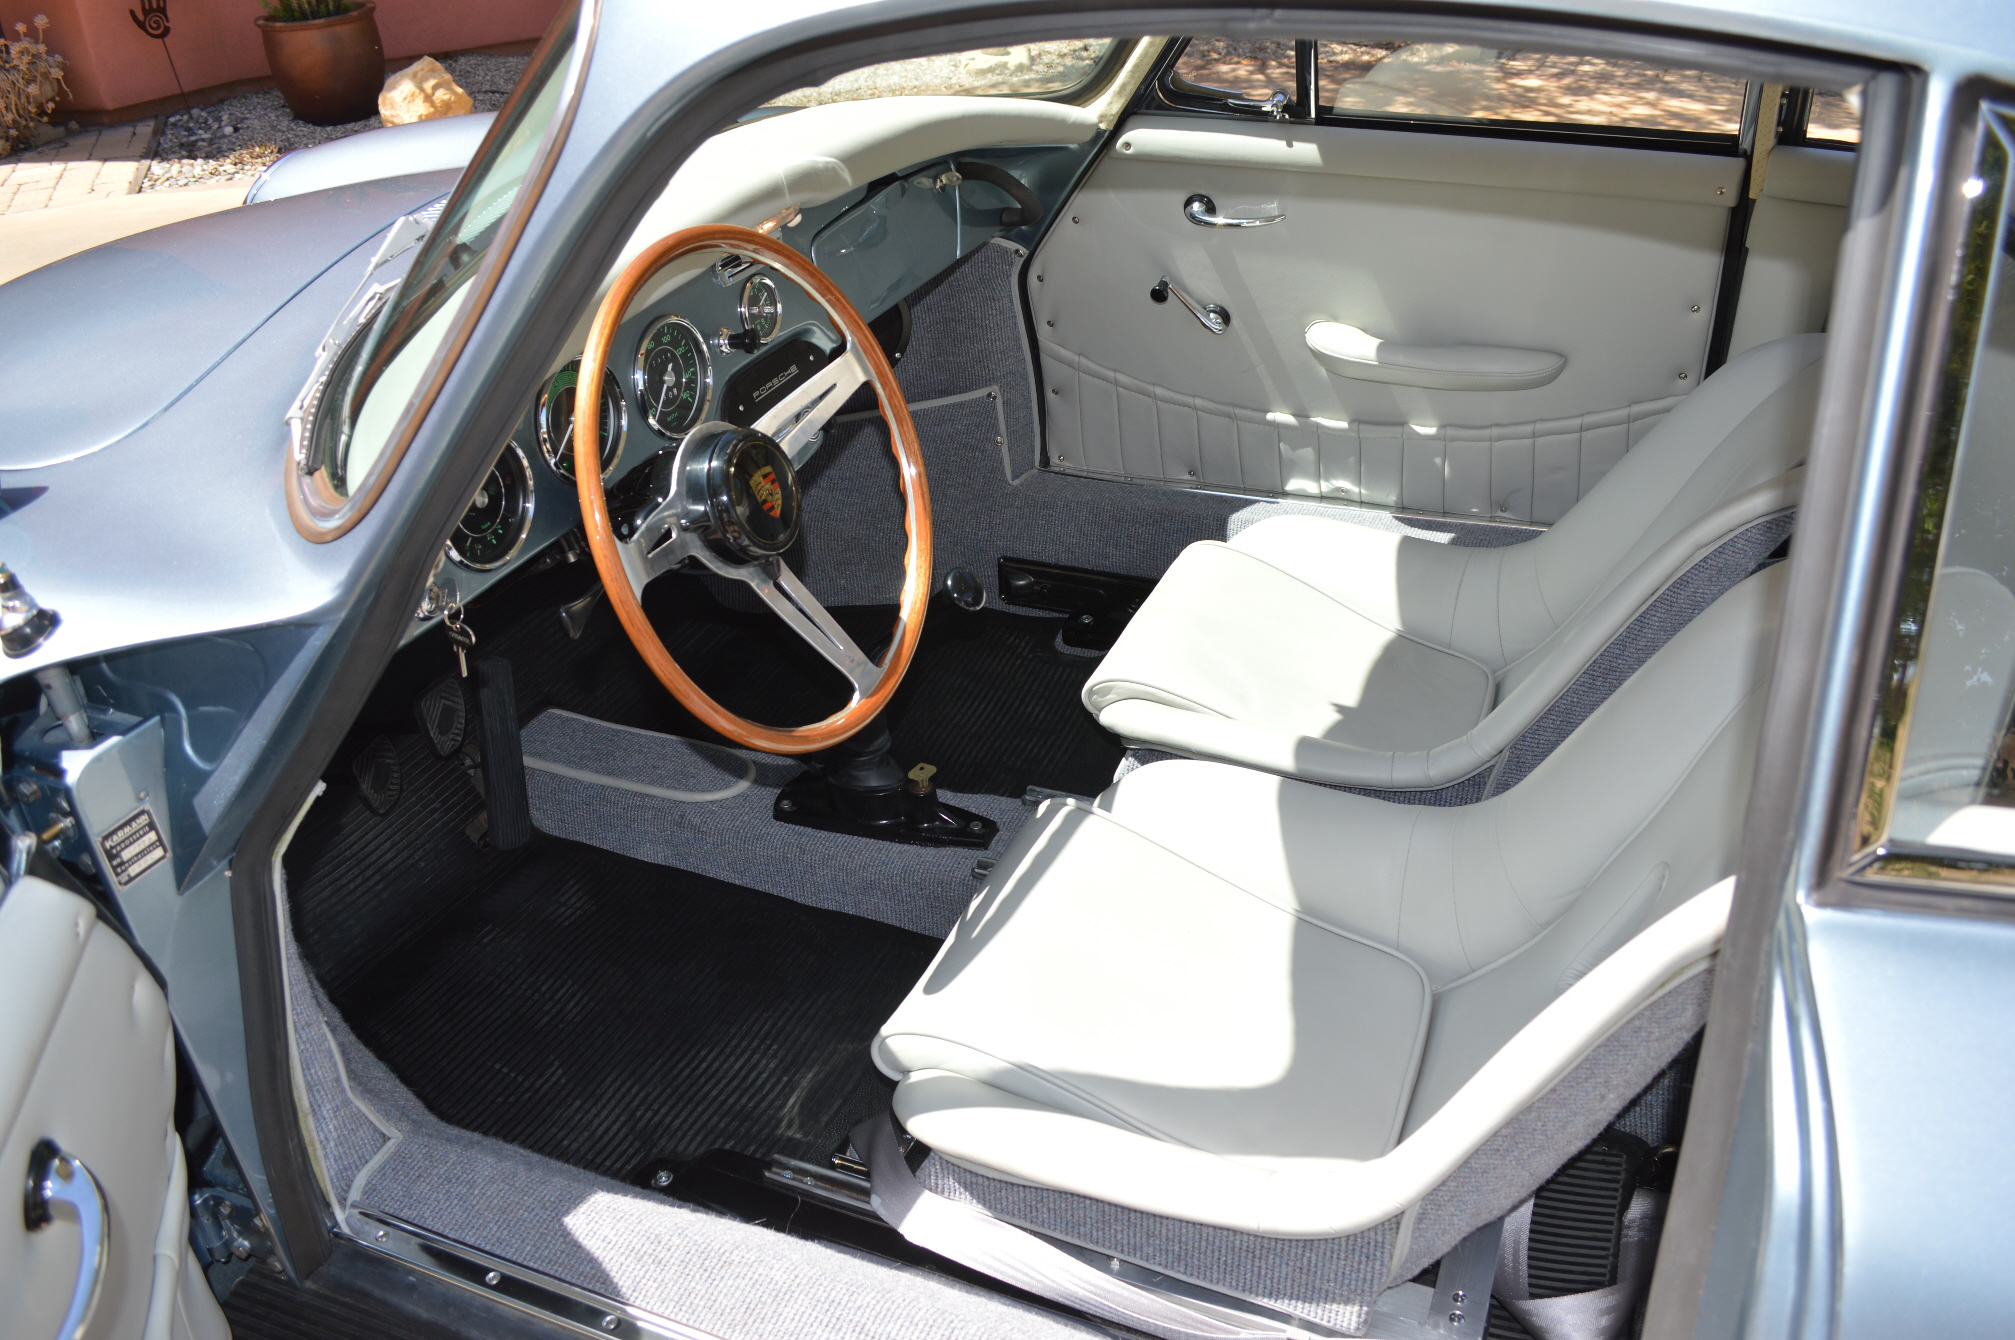 The combination of leather and carpet make this a very attractive interior treatment.